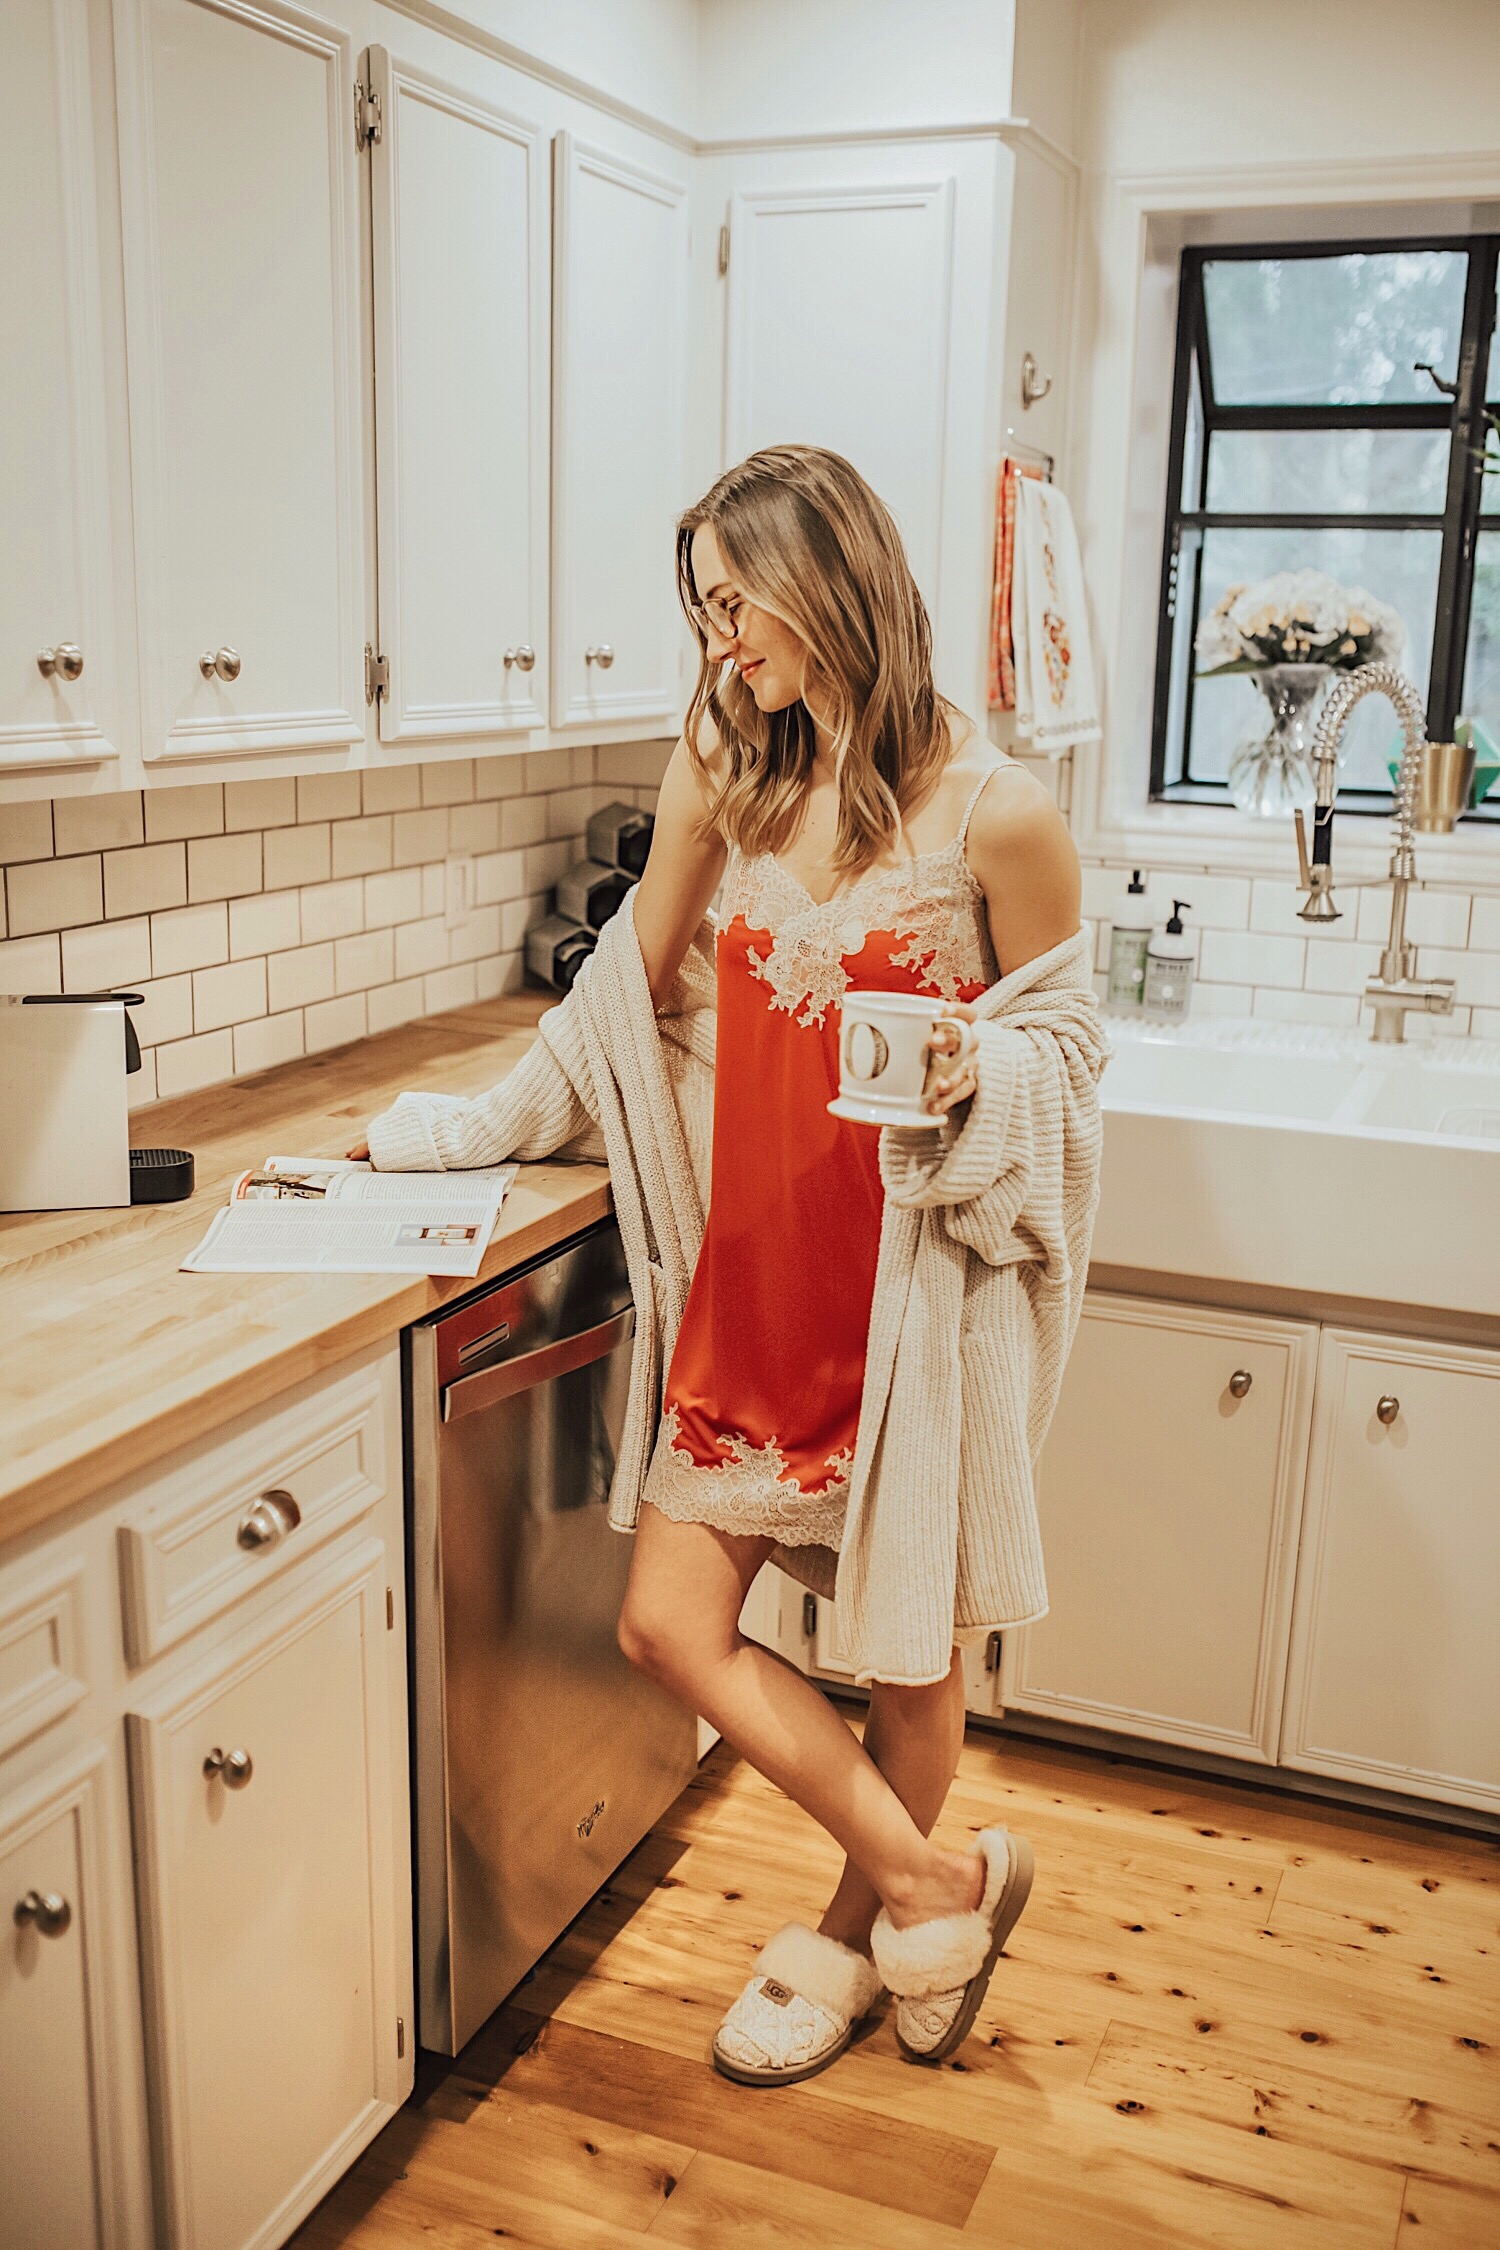 Cozy Mornings At Home - LivvyLand